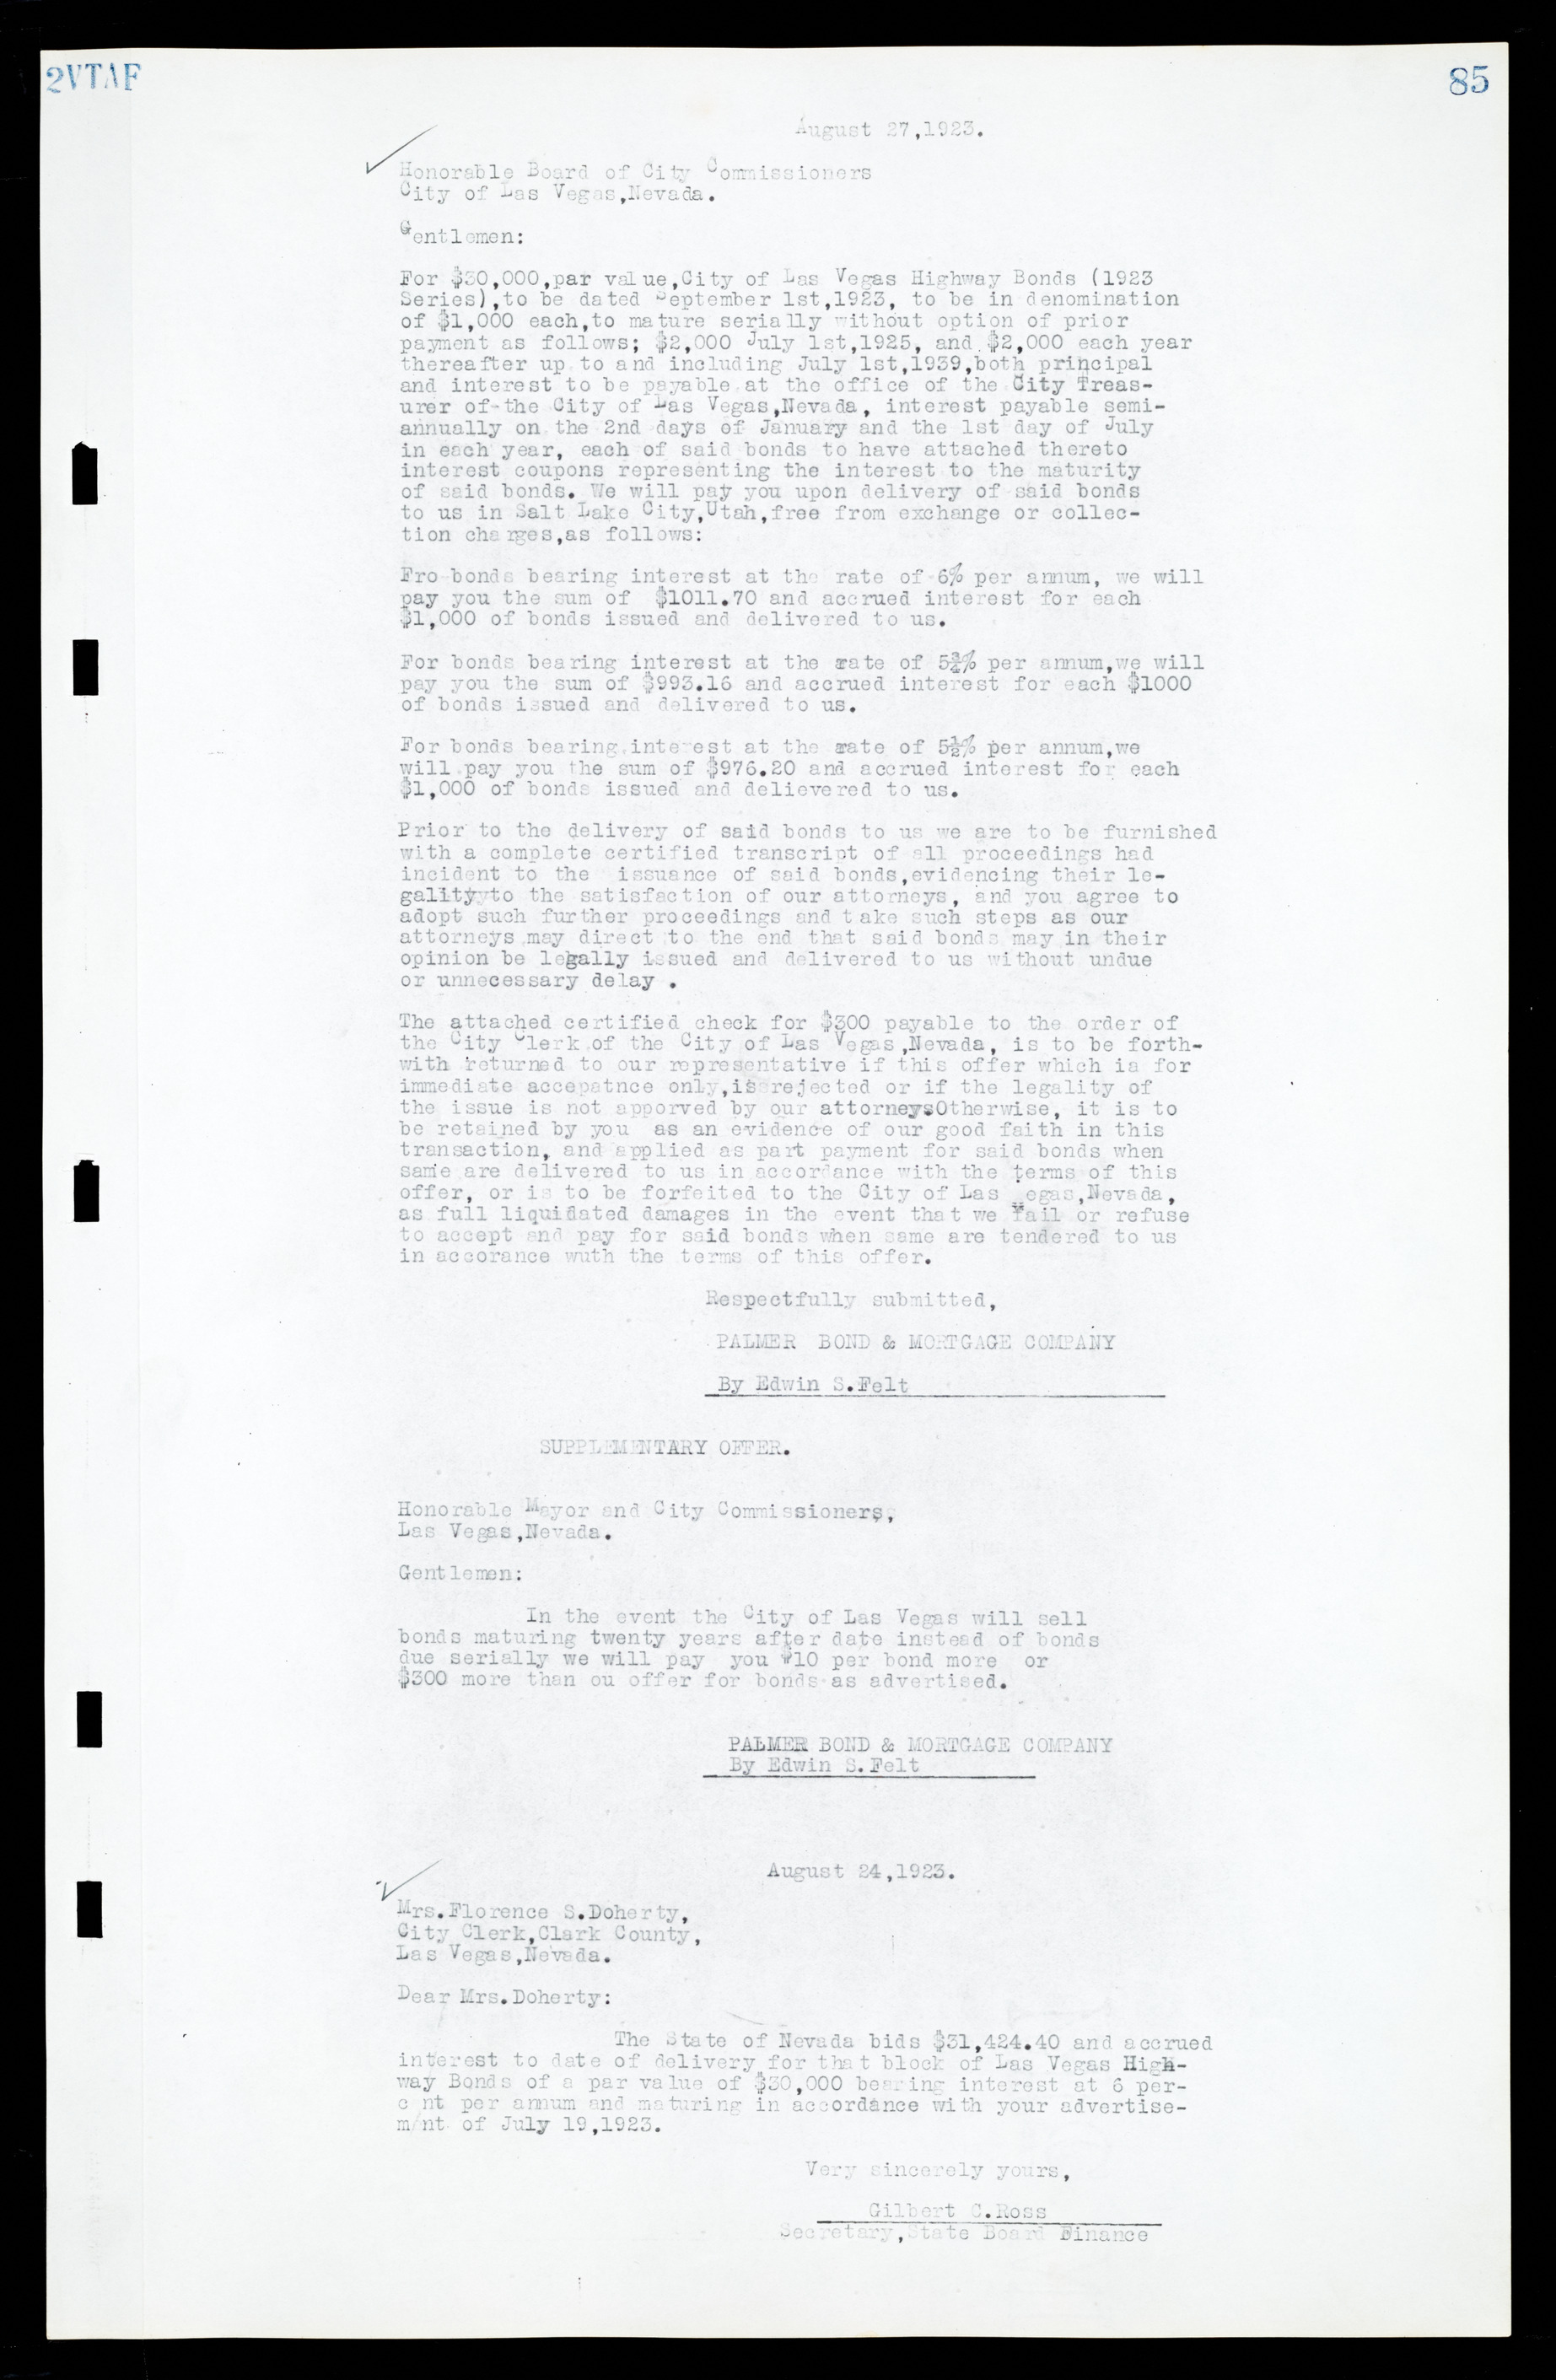 Las Vegas City Commission Minutes, March 1, 1922 to May 10, 1929, lvc000002-92